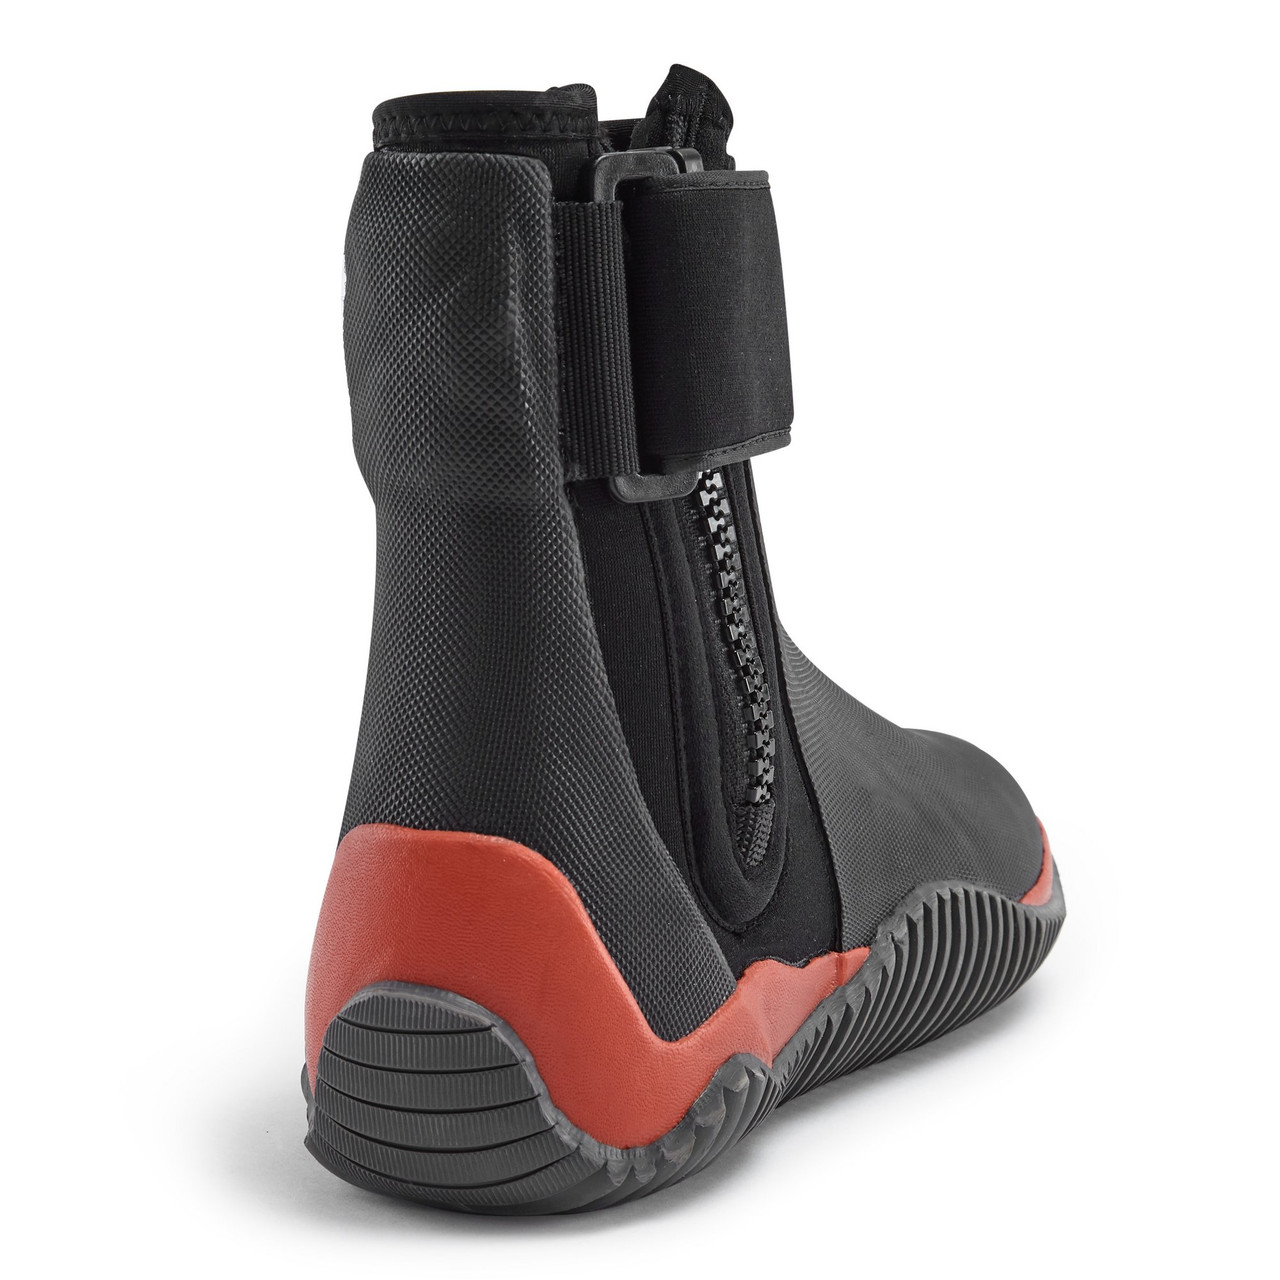 Hydro Short Boot - Gill Marine Official US Store